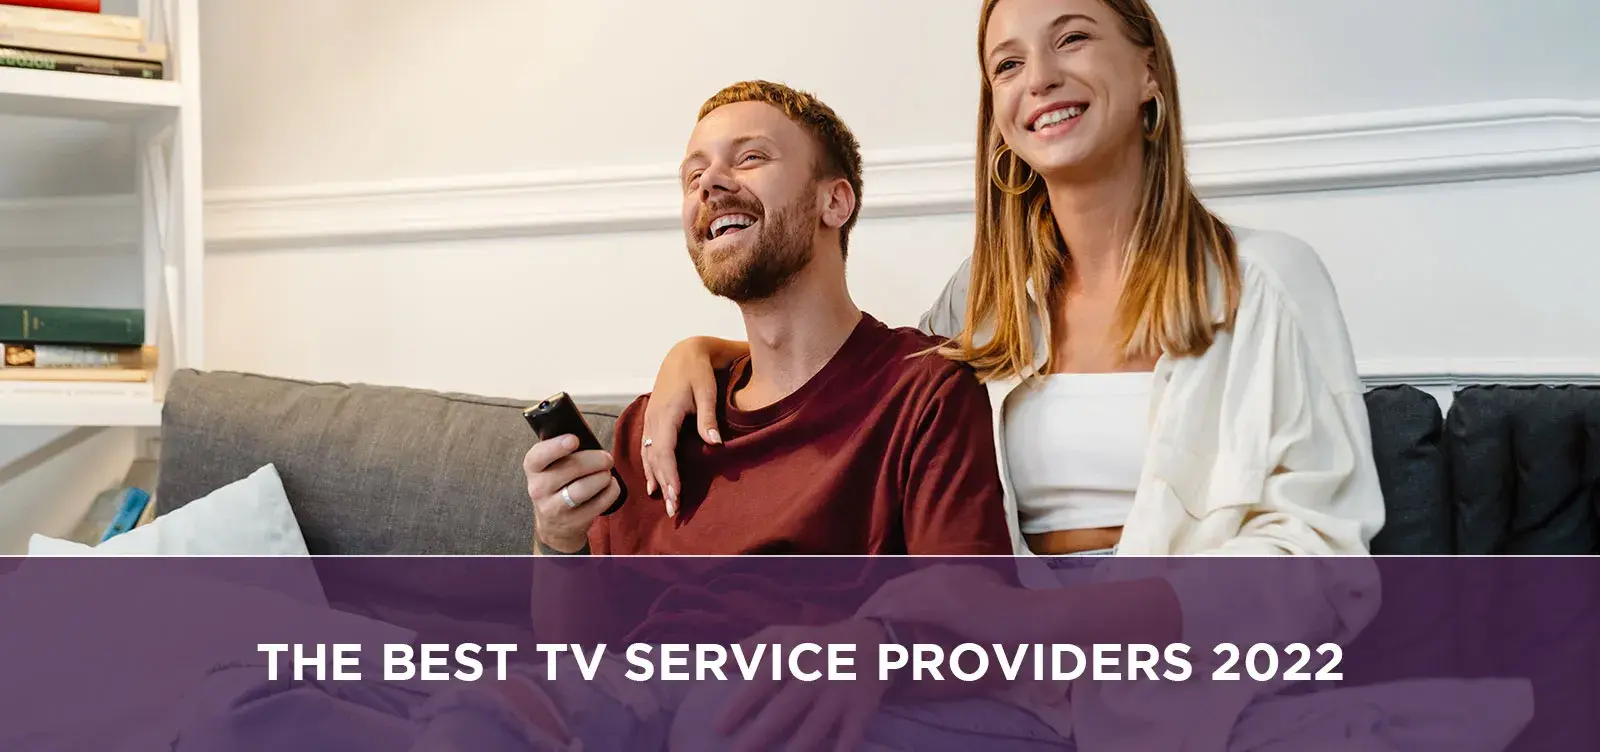 The Best TV service providers 2022